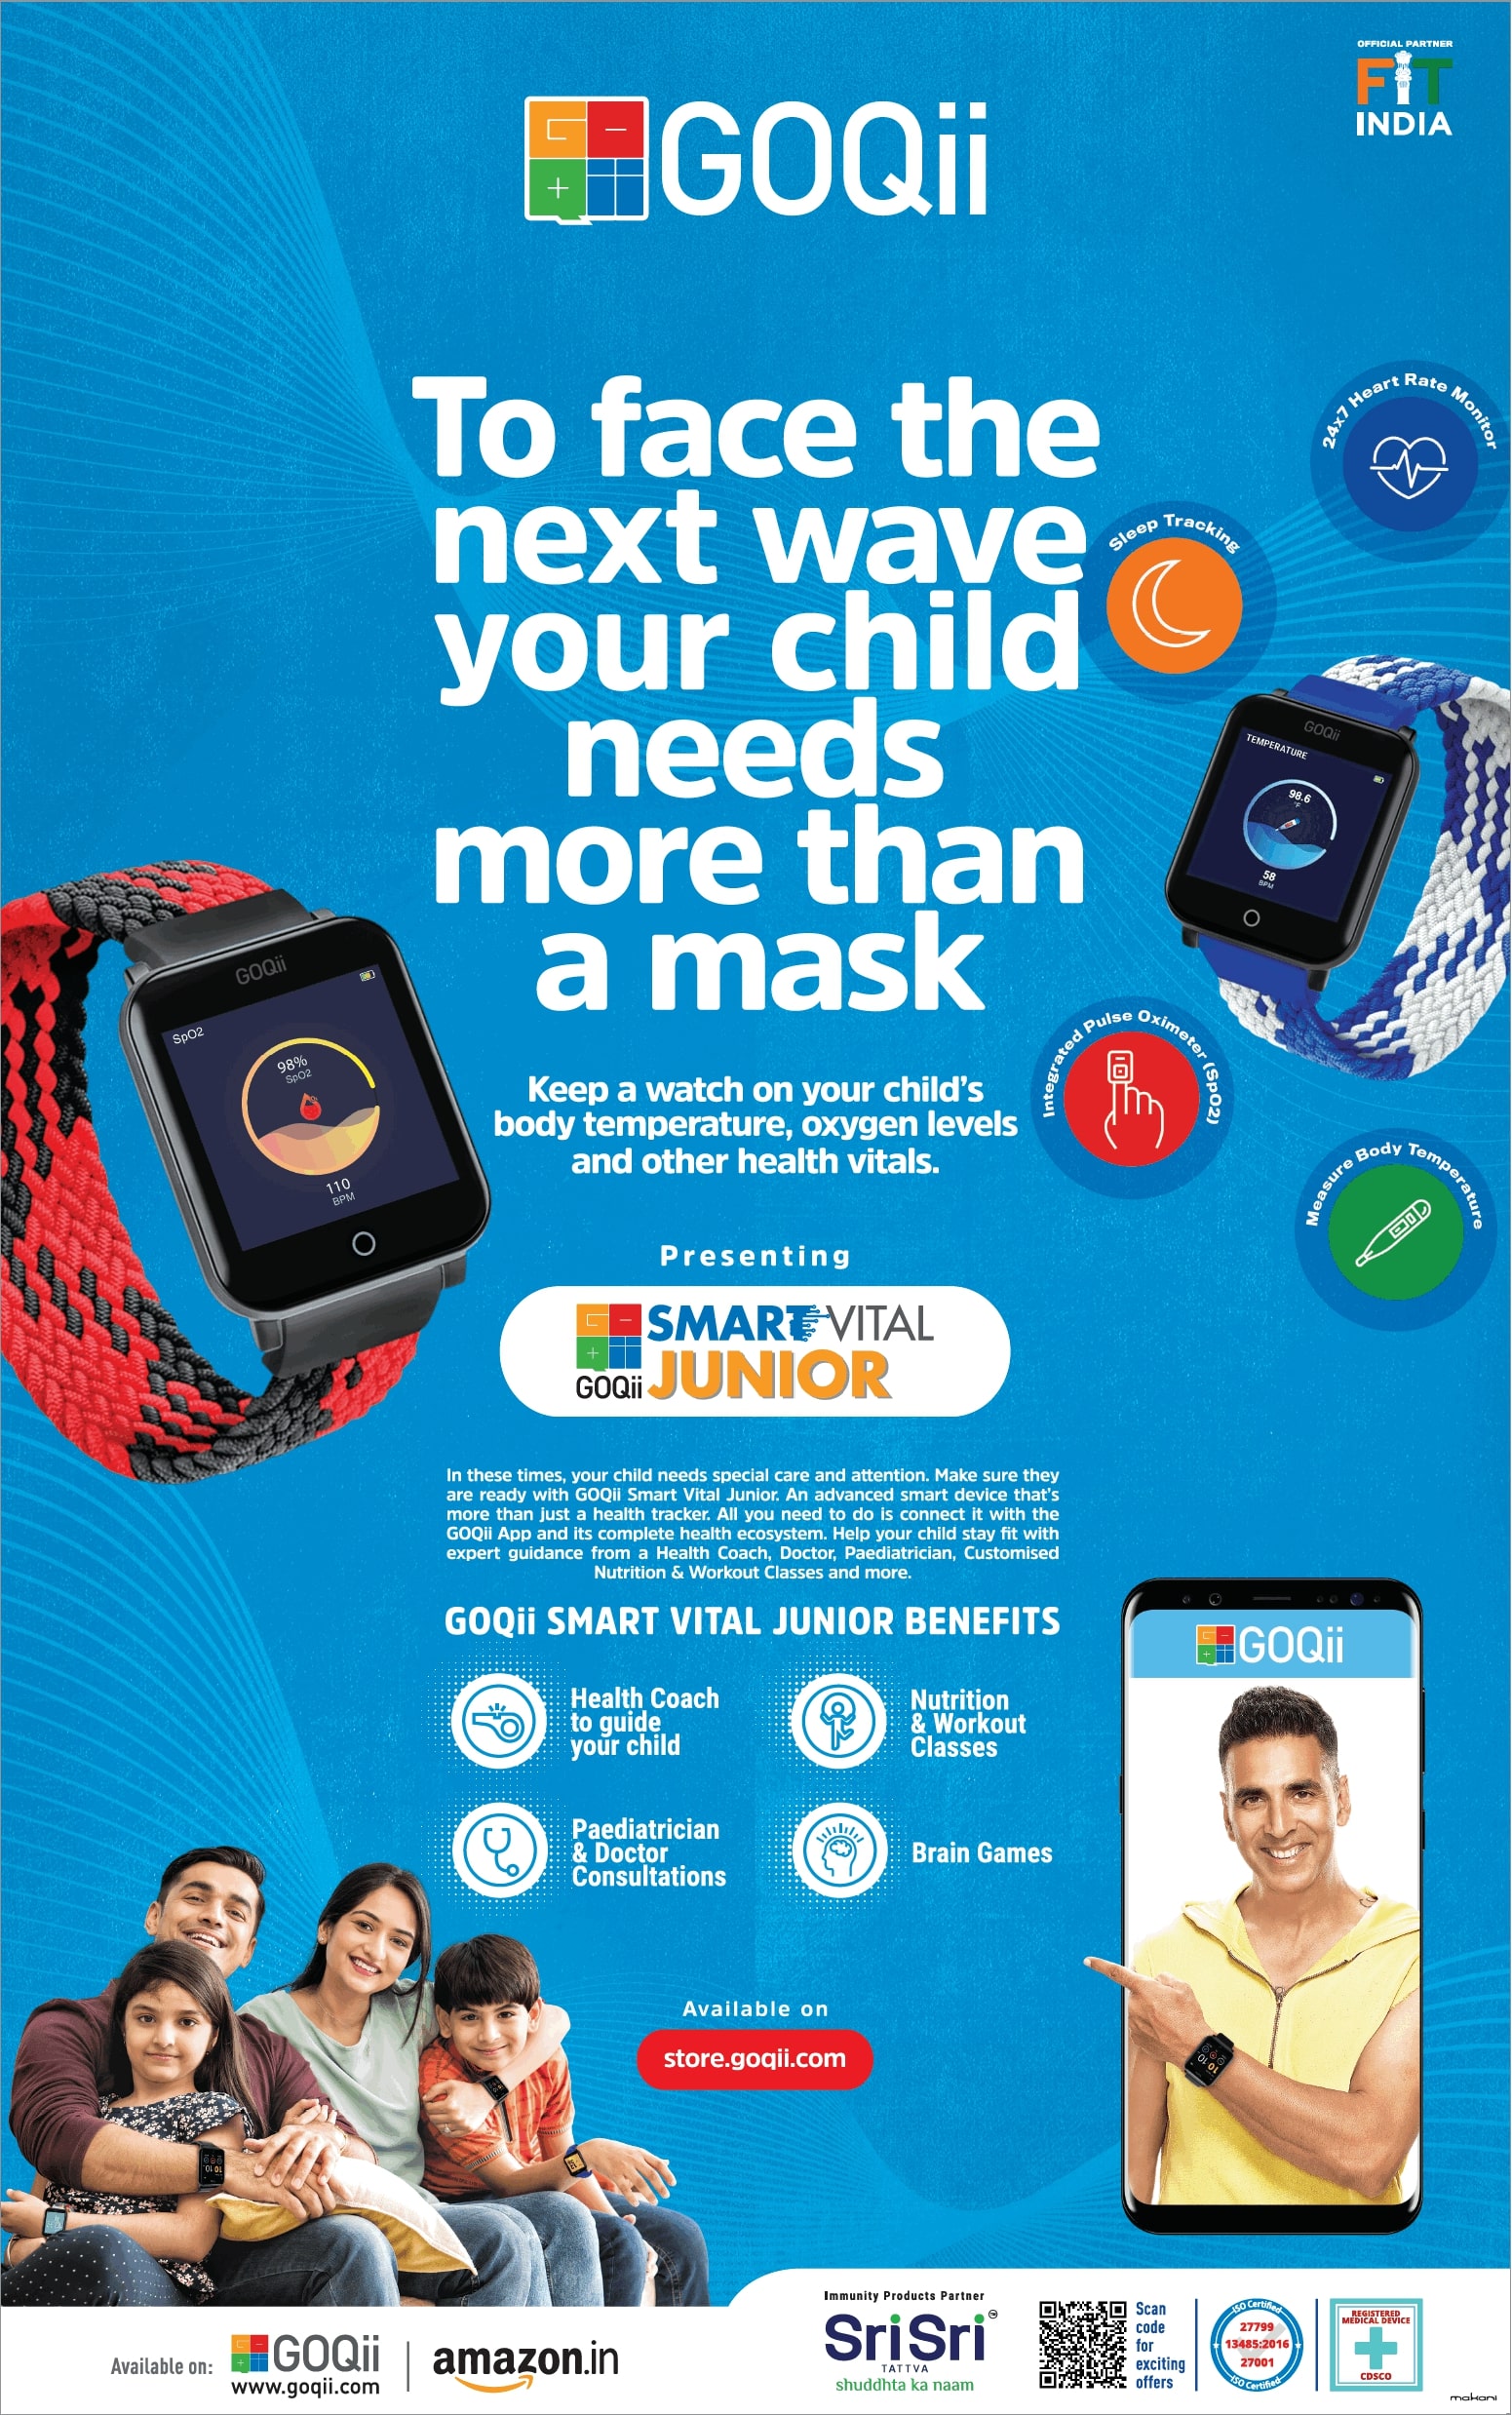 goqii-to-face-the-next-wave-your-child-needs-more-than-a-mask-ad-times-of-india-mumbai-05-06-2021